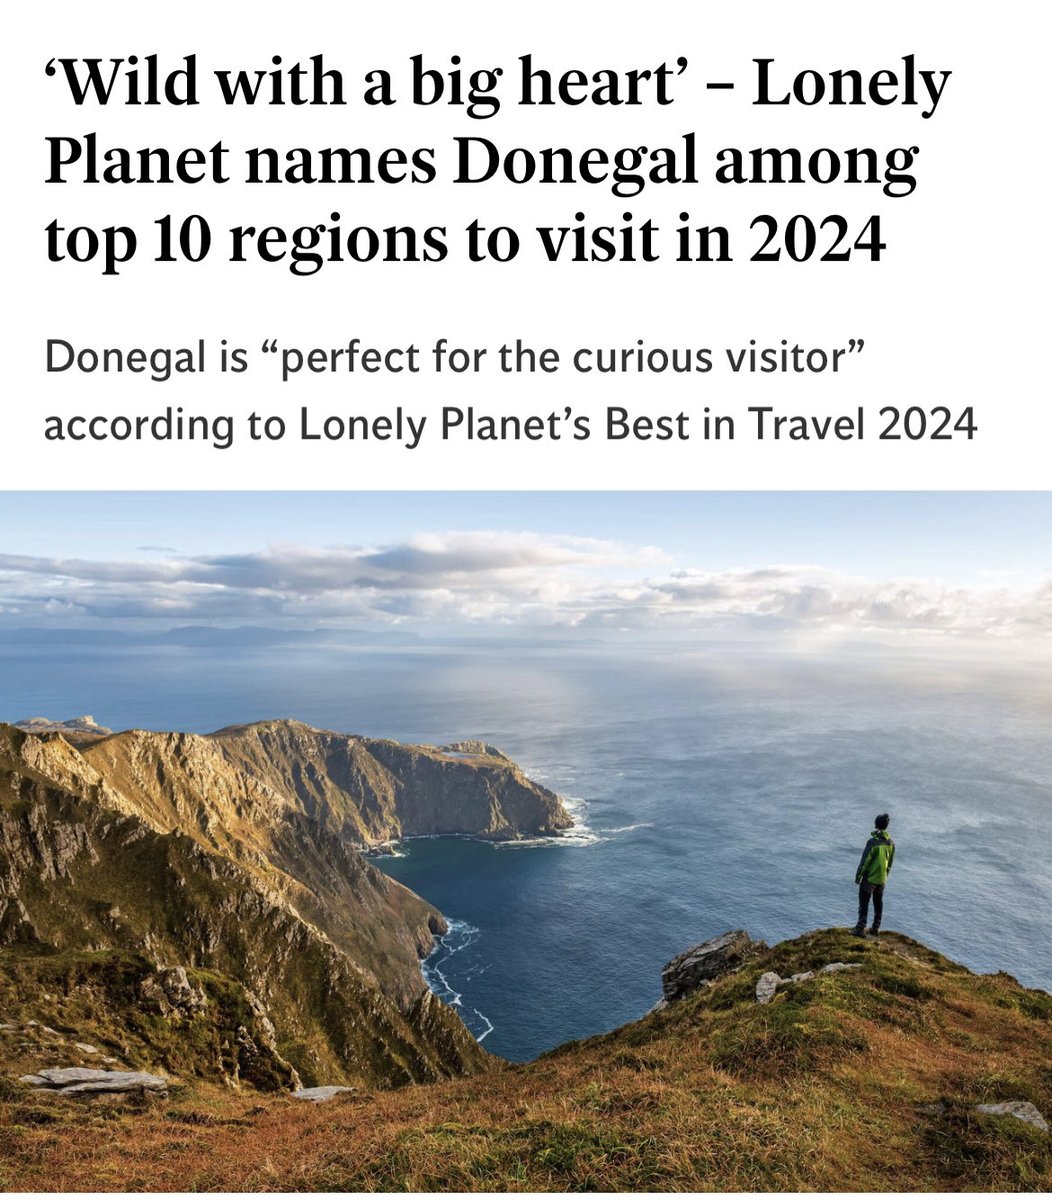 Proud Proud Proud ! Our once forgotten county now sits at the Top Table with that most apt description ‘wild with a heart‘ amongst the most amazing places on Earth ! Thank you ⁦@lonelyplanet⁩ ⁦@Failte_Ireland⁩ …. Our beloved #Donegal take a bow 🥂🥂🥂👏🏼